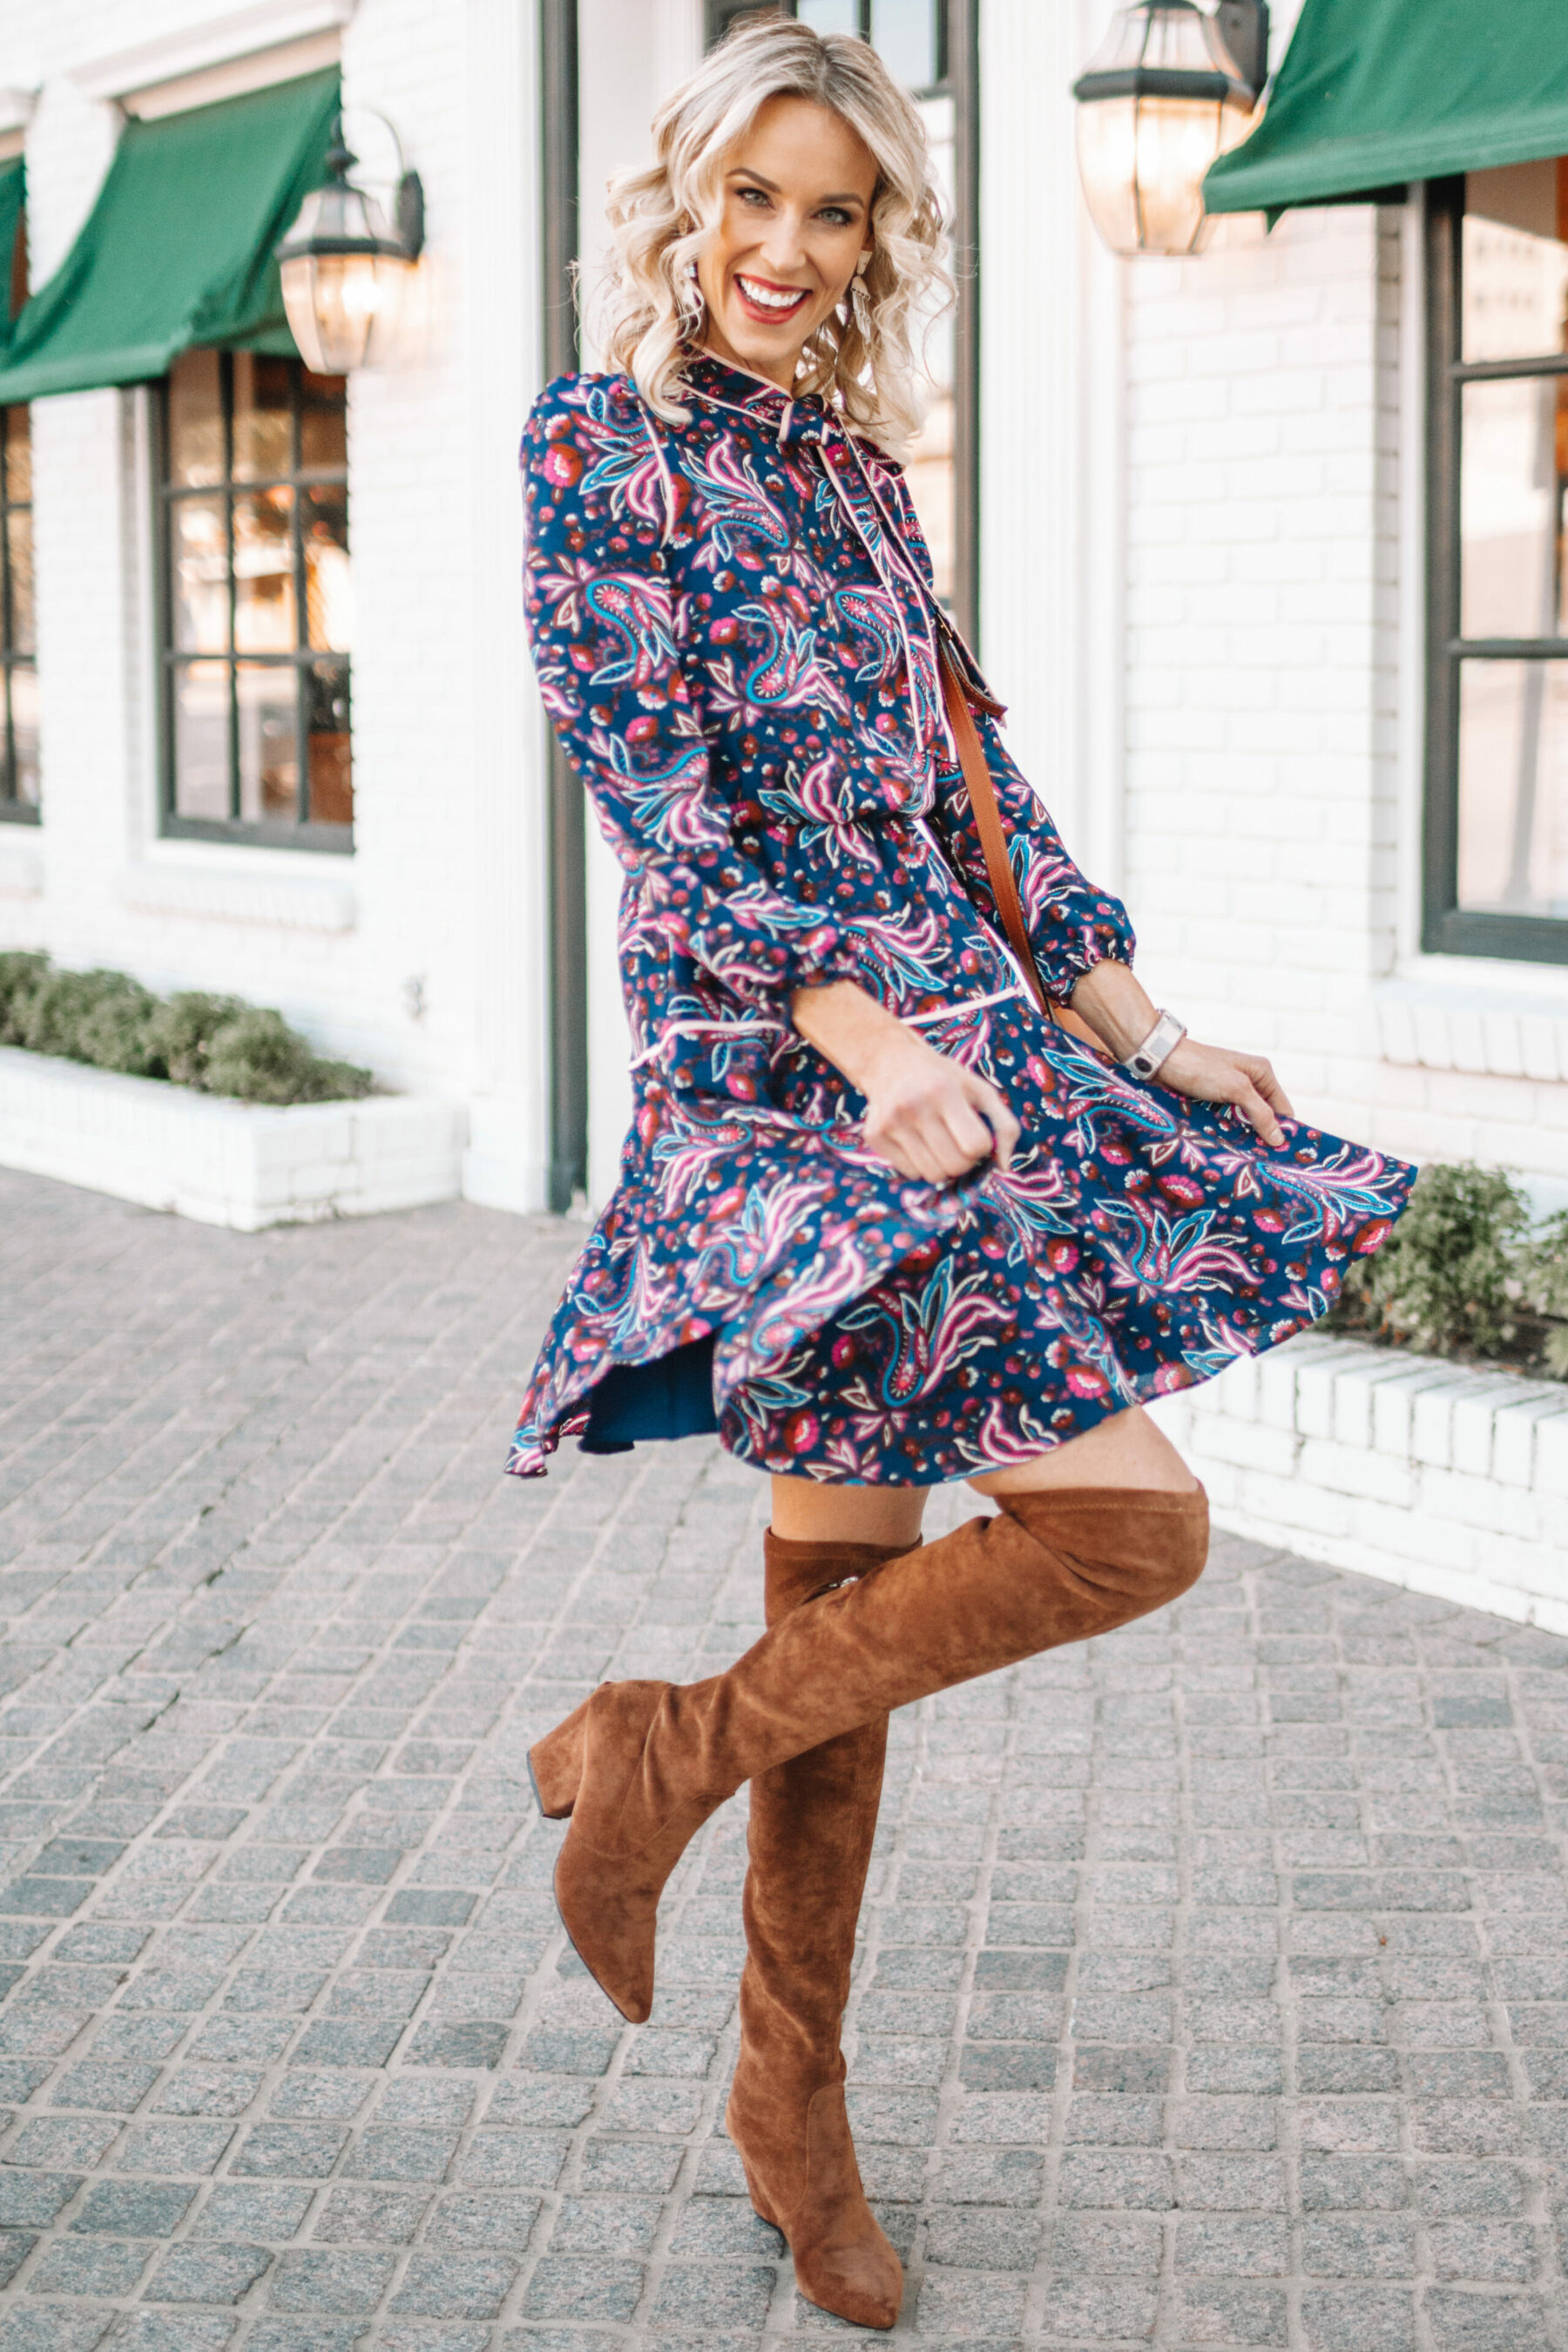 knee high boots dress outfit